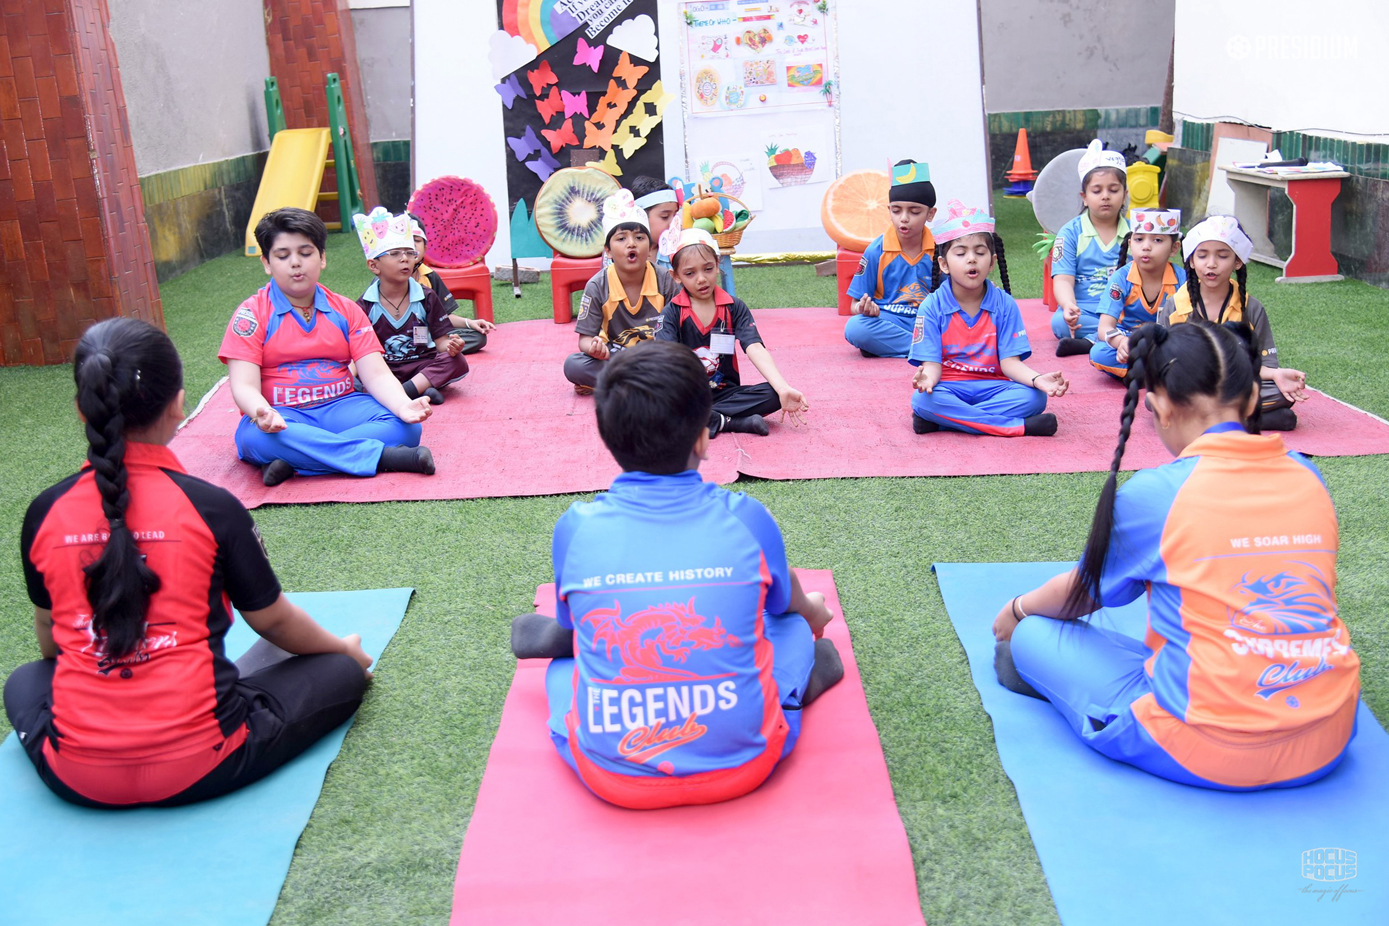 Presidium Vivek Vihar, STUDENTS LEARN THE IMPORTANCE OF STAYING PHYSICALLY FIT